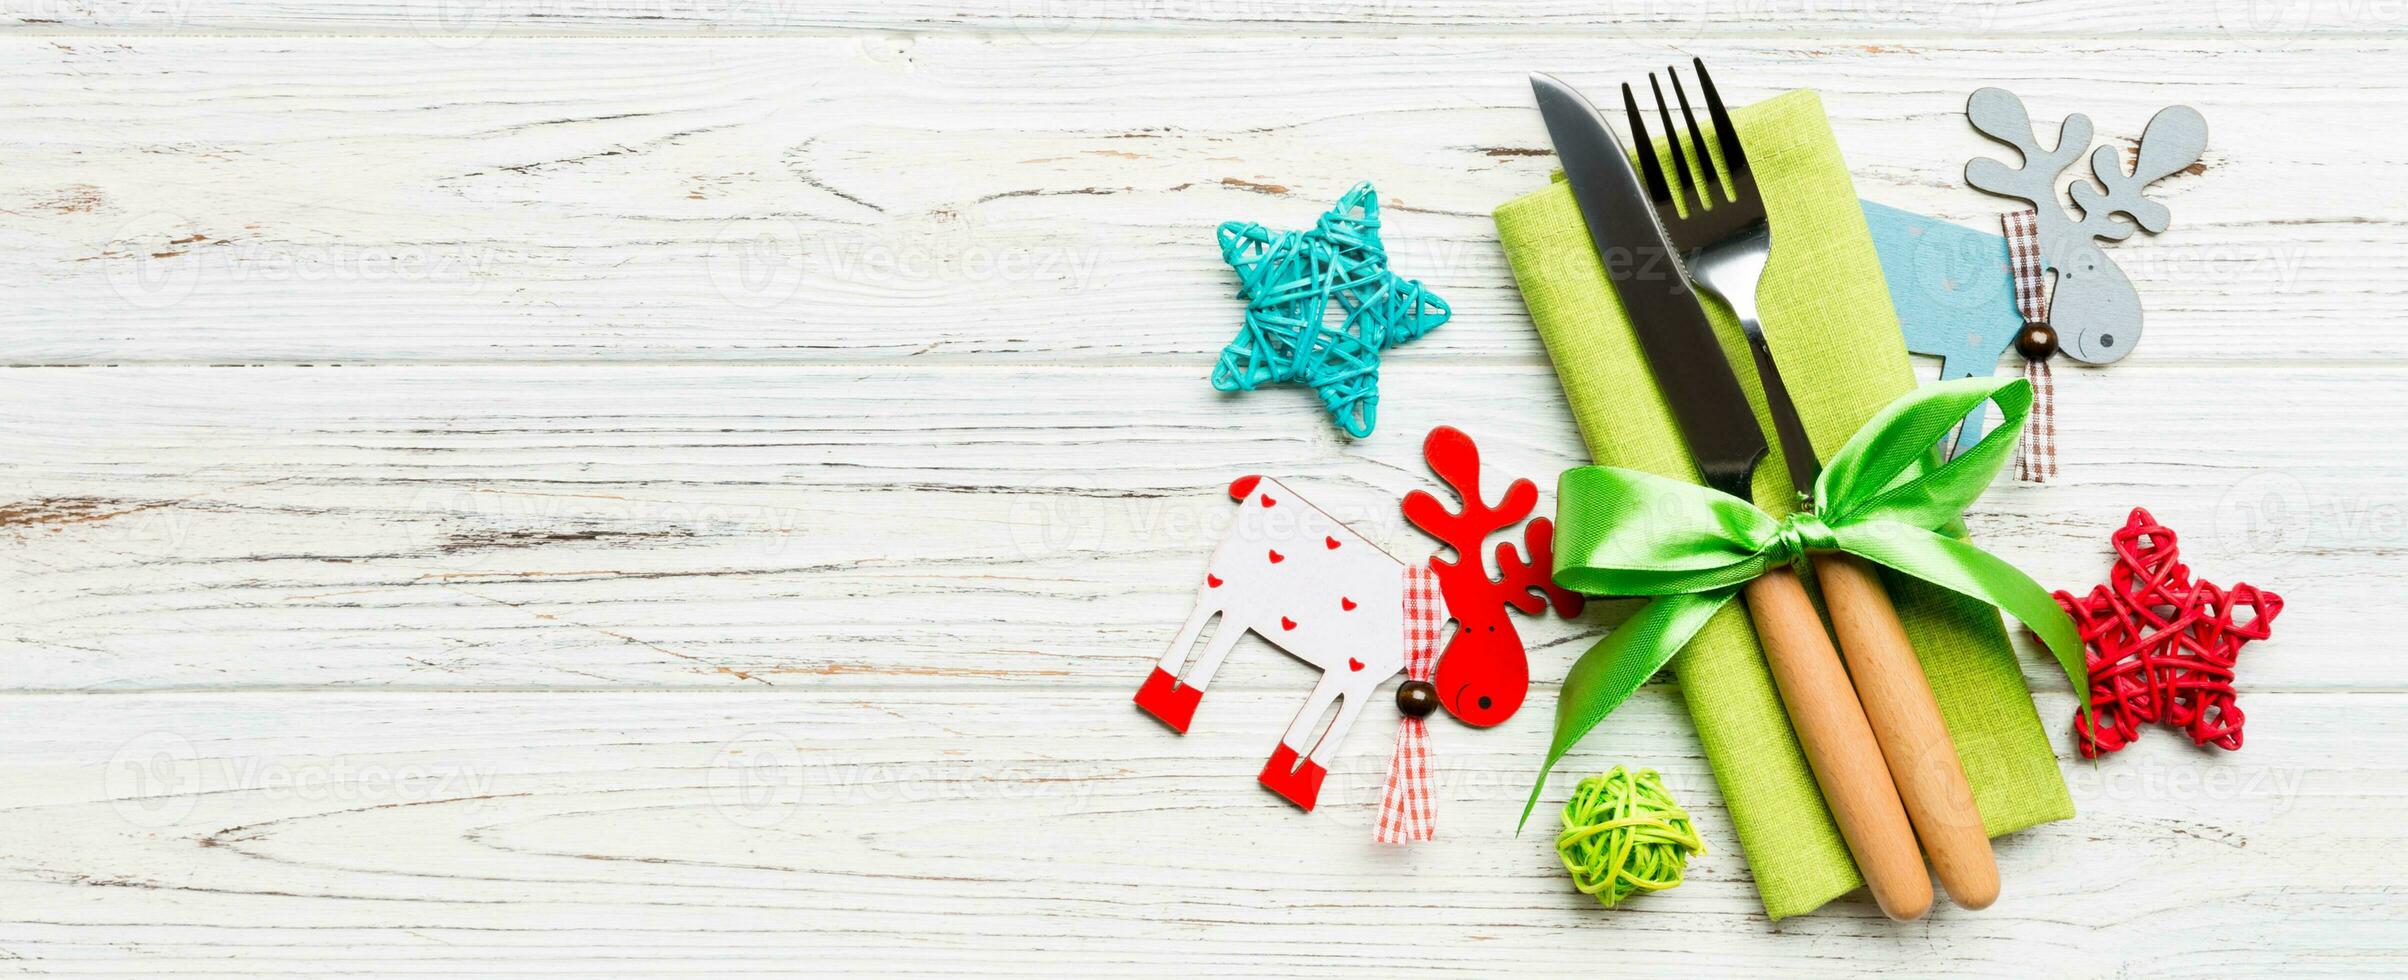 Banner New Year set of fork and knife on napkin. Top view of christmas decorations and reindeer on wooden background. Holiday family dinner concept with empty space for your design photo